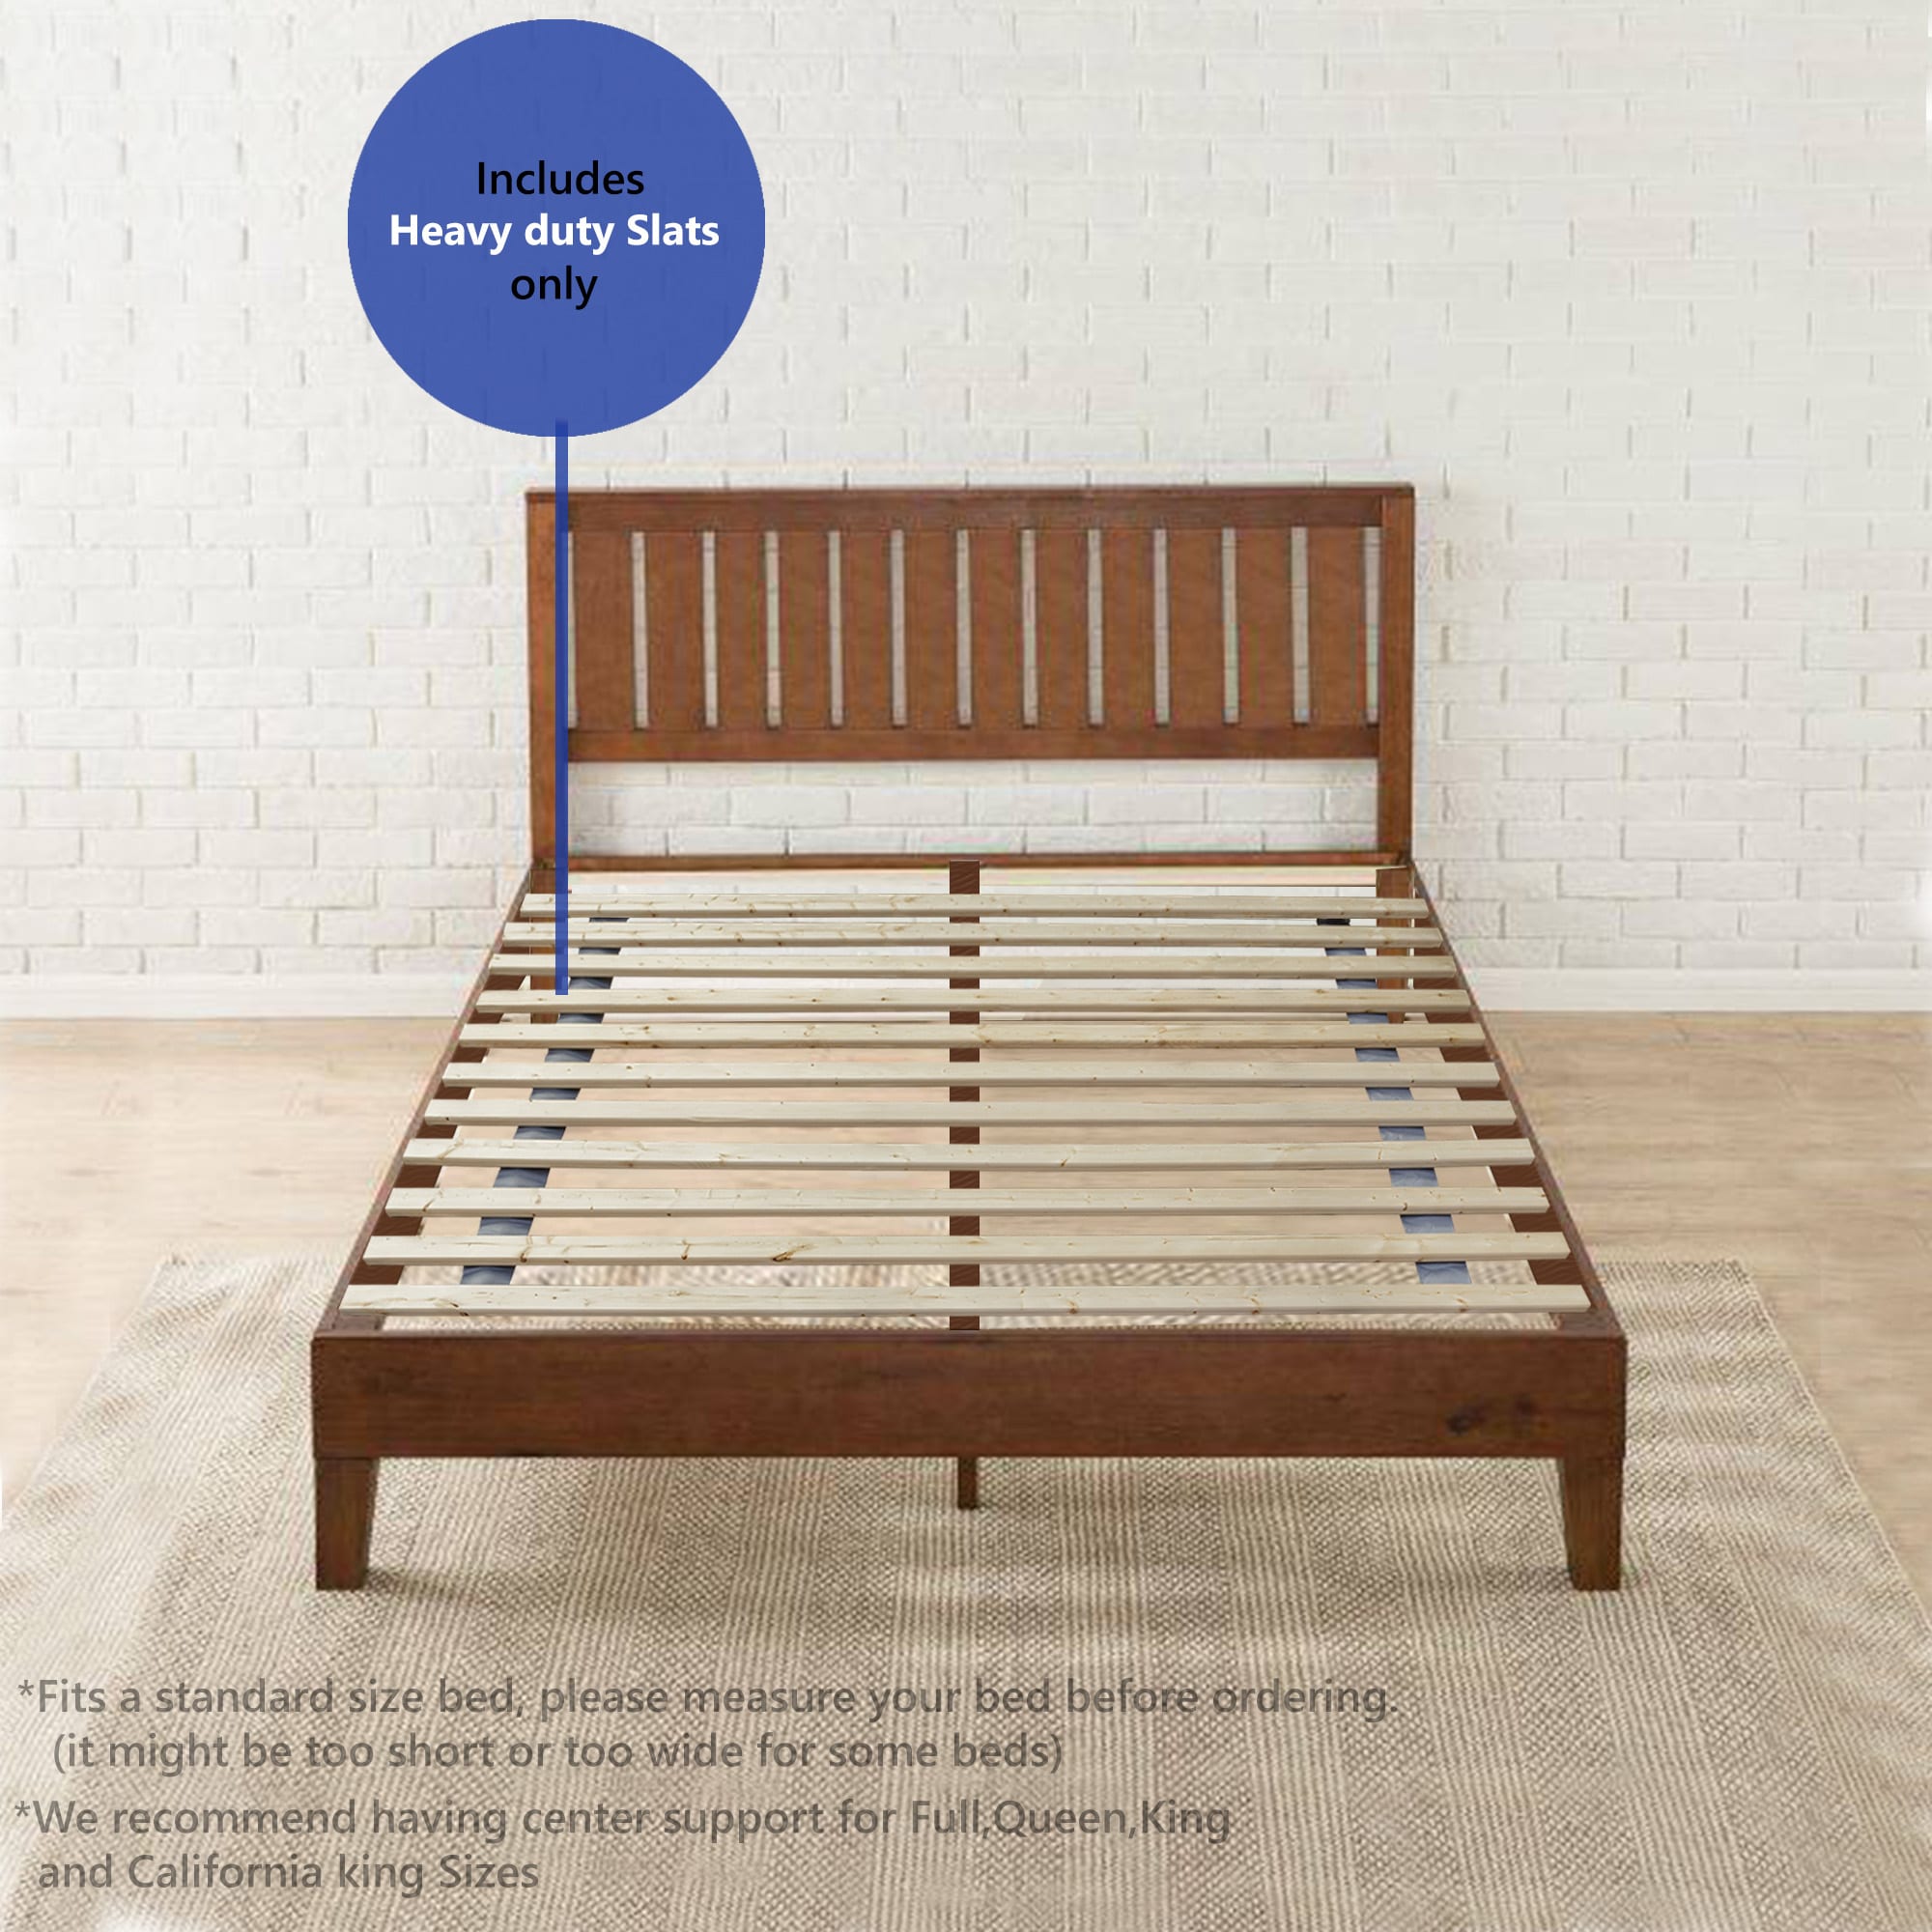 Glance 0 75 In Heavy Duty Mattress, Full Size Bed Frame Without Center Support